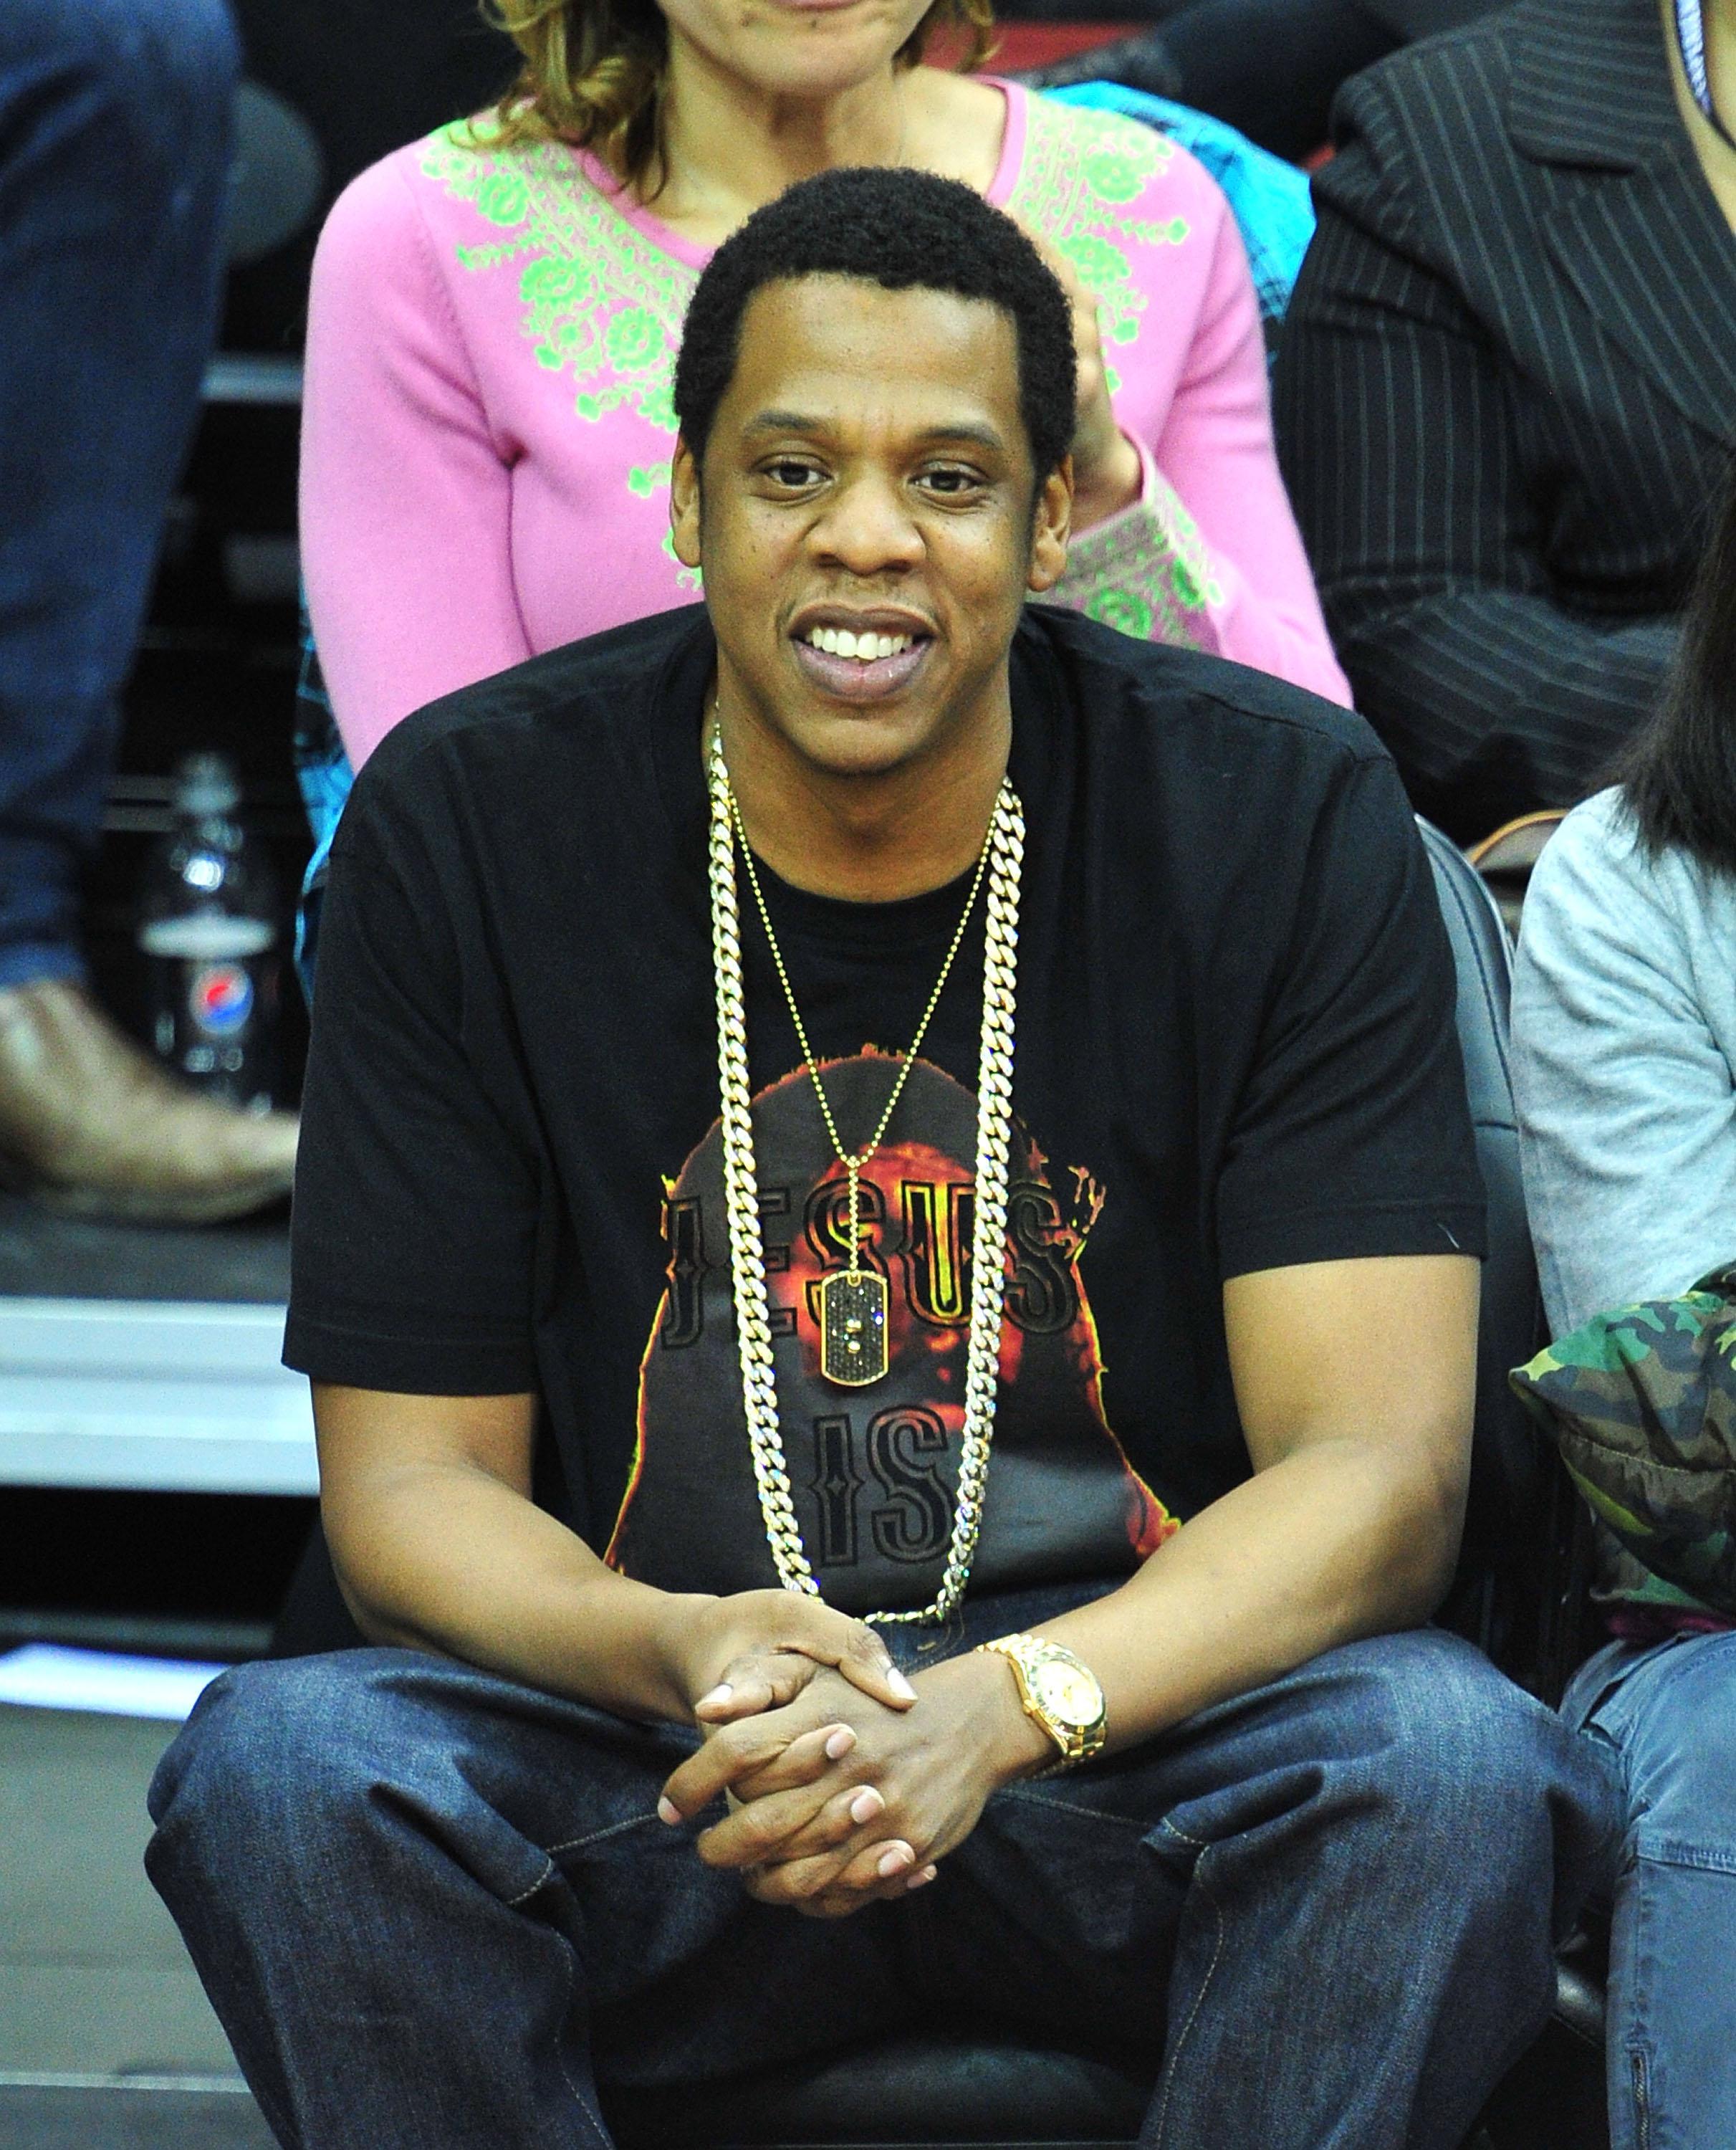 Celebrities Attend The Los Angeles Clippers Vs New Jersey Nets Game - March 11, 2011